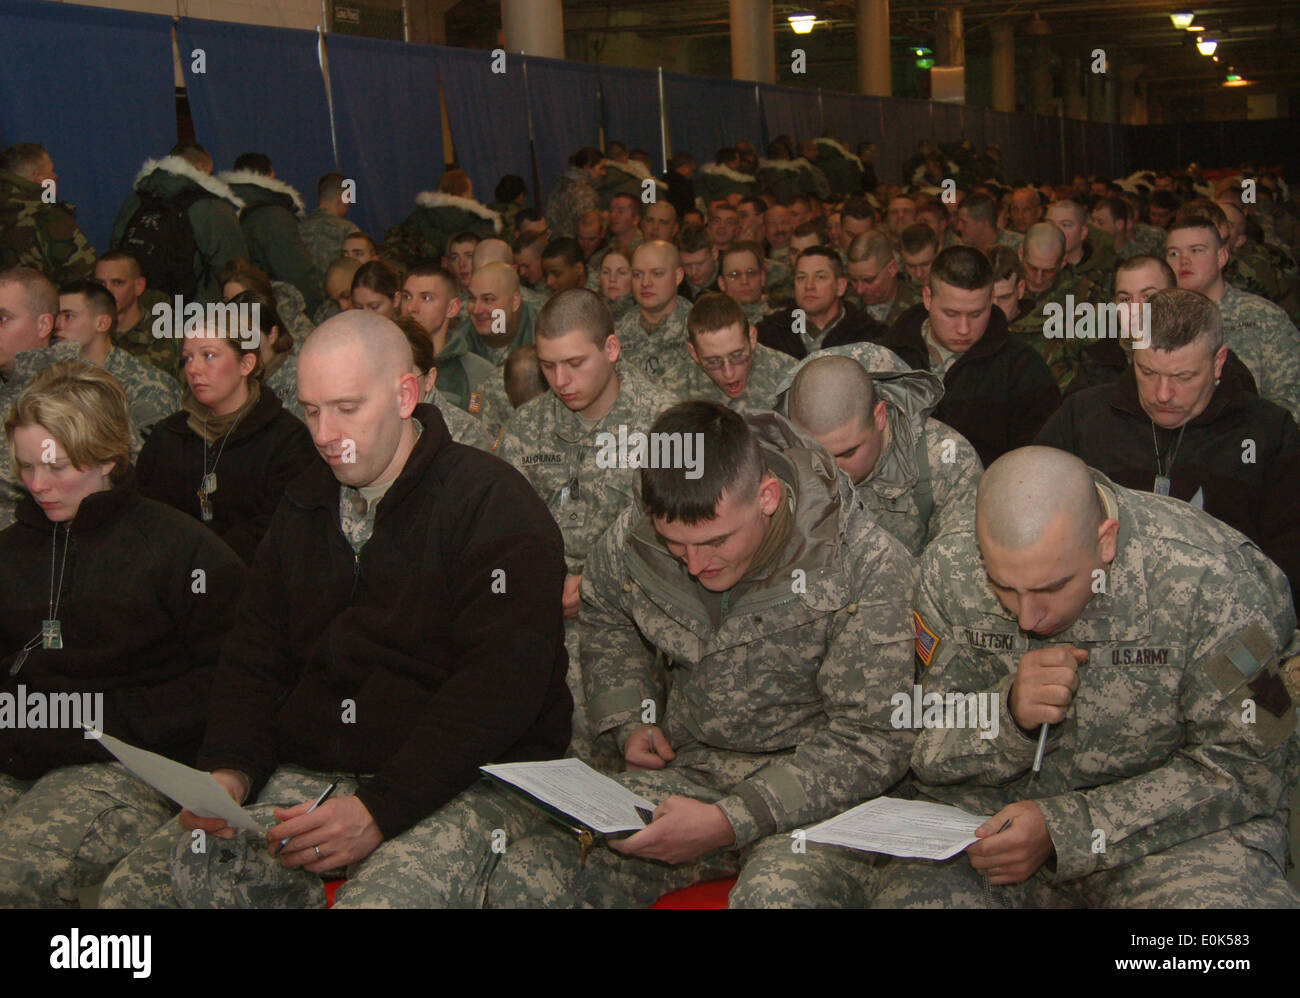 Pennsylvania and Delaware National Guard members listen attentively to the briefings during the Joint Reception Staging Orienta Stock Photo